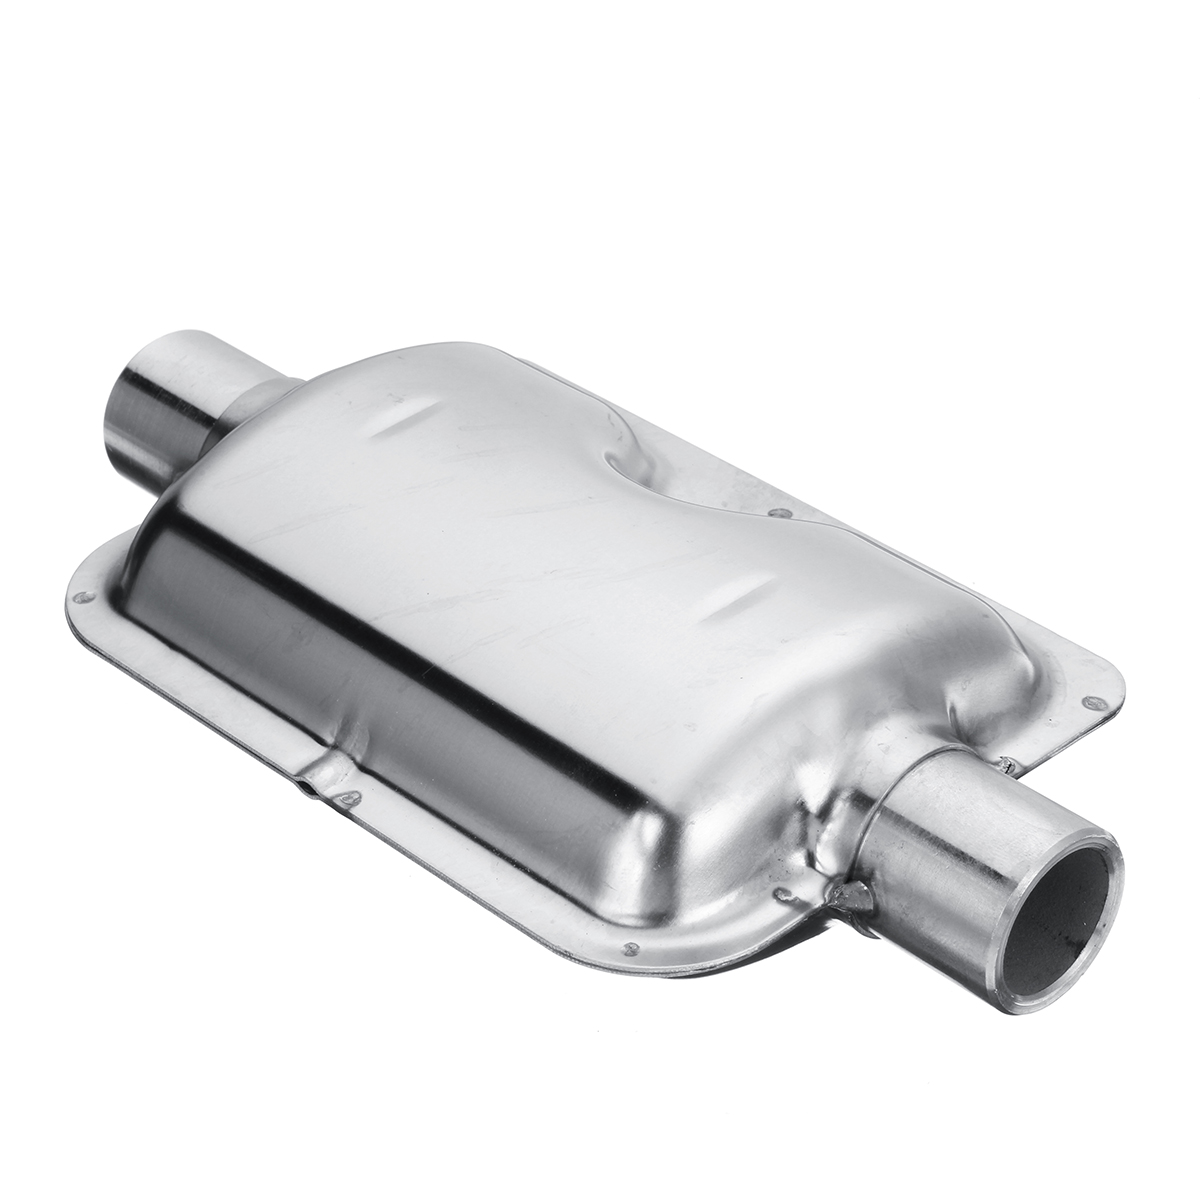 200cm-Stainless-Steel-Exhaust-Pipe-With-Silencer-For-Car-Parking-Air-Diesel-Heater-1593977-9